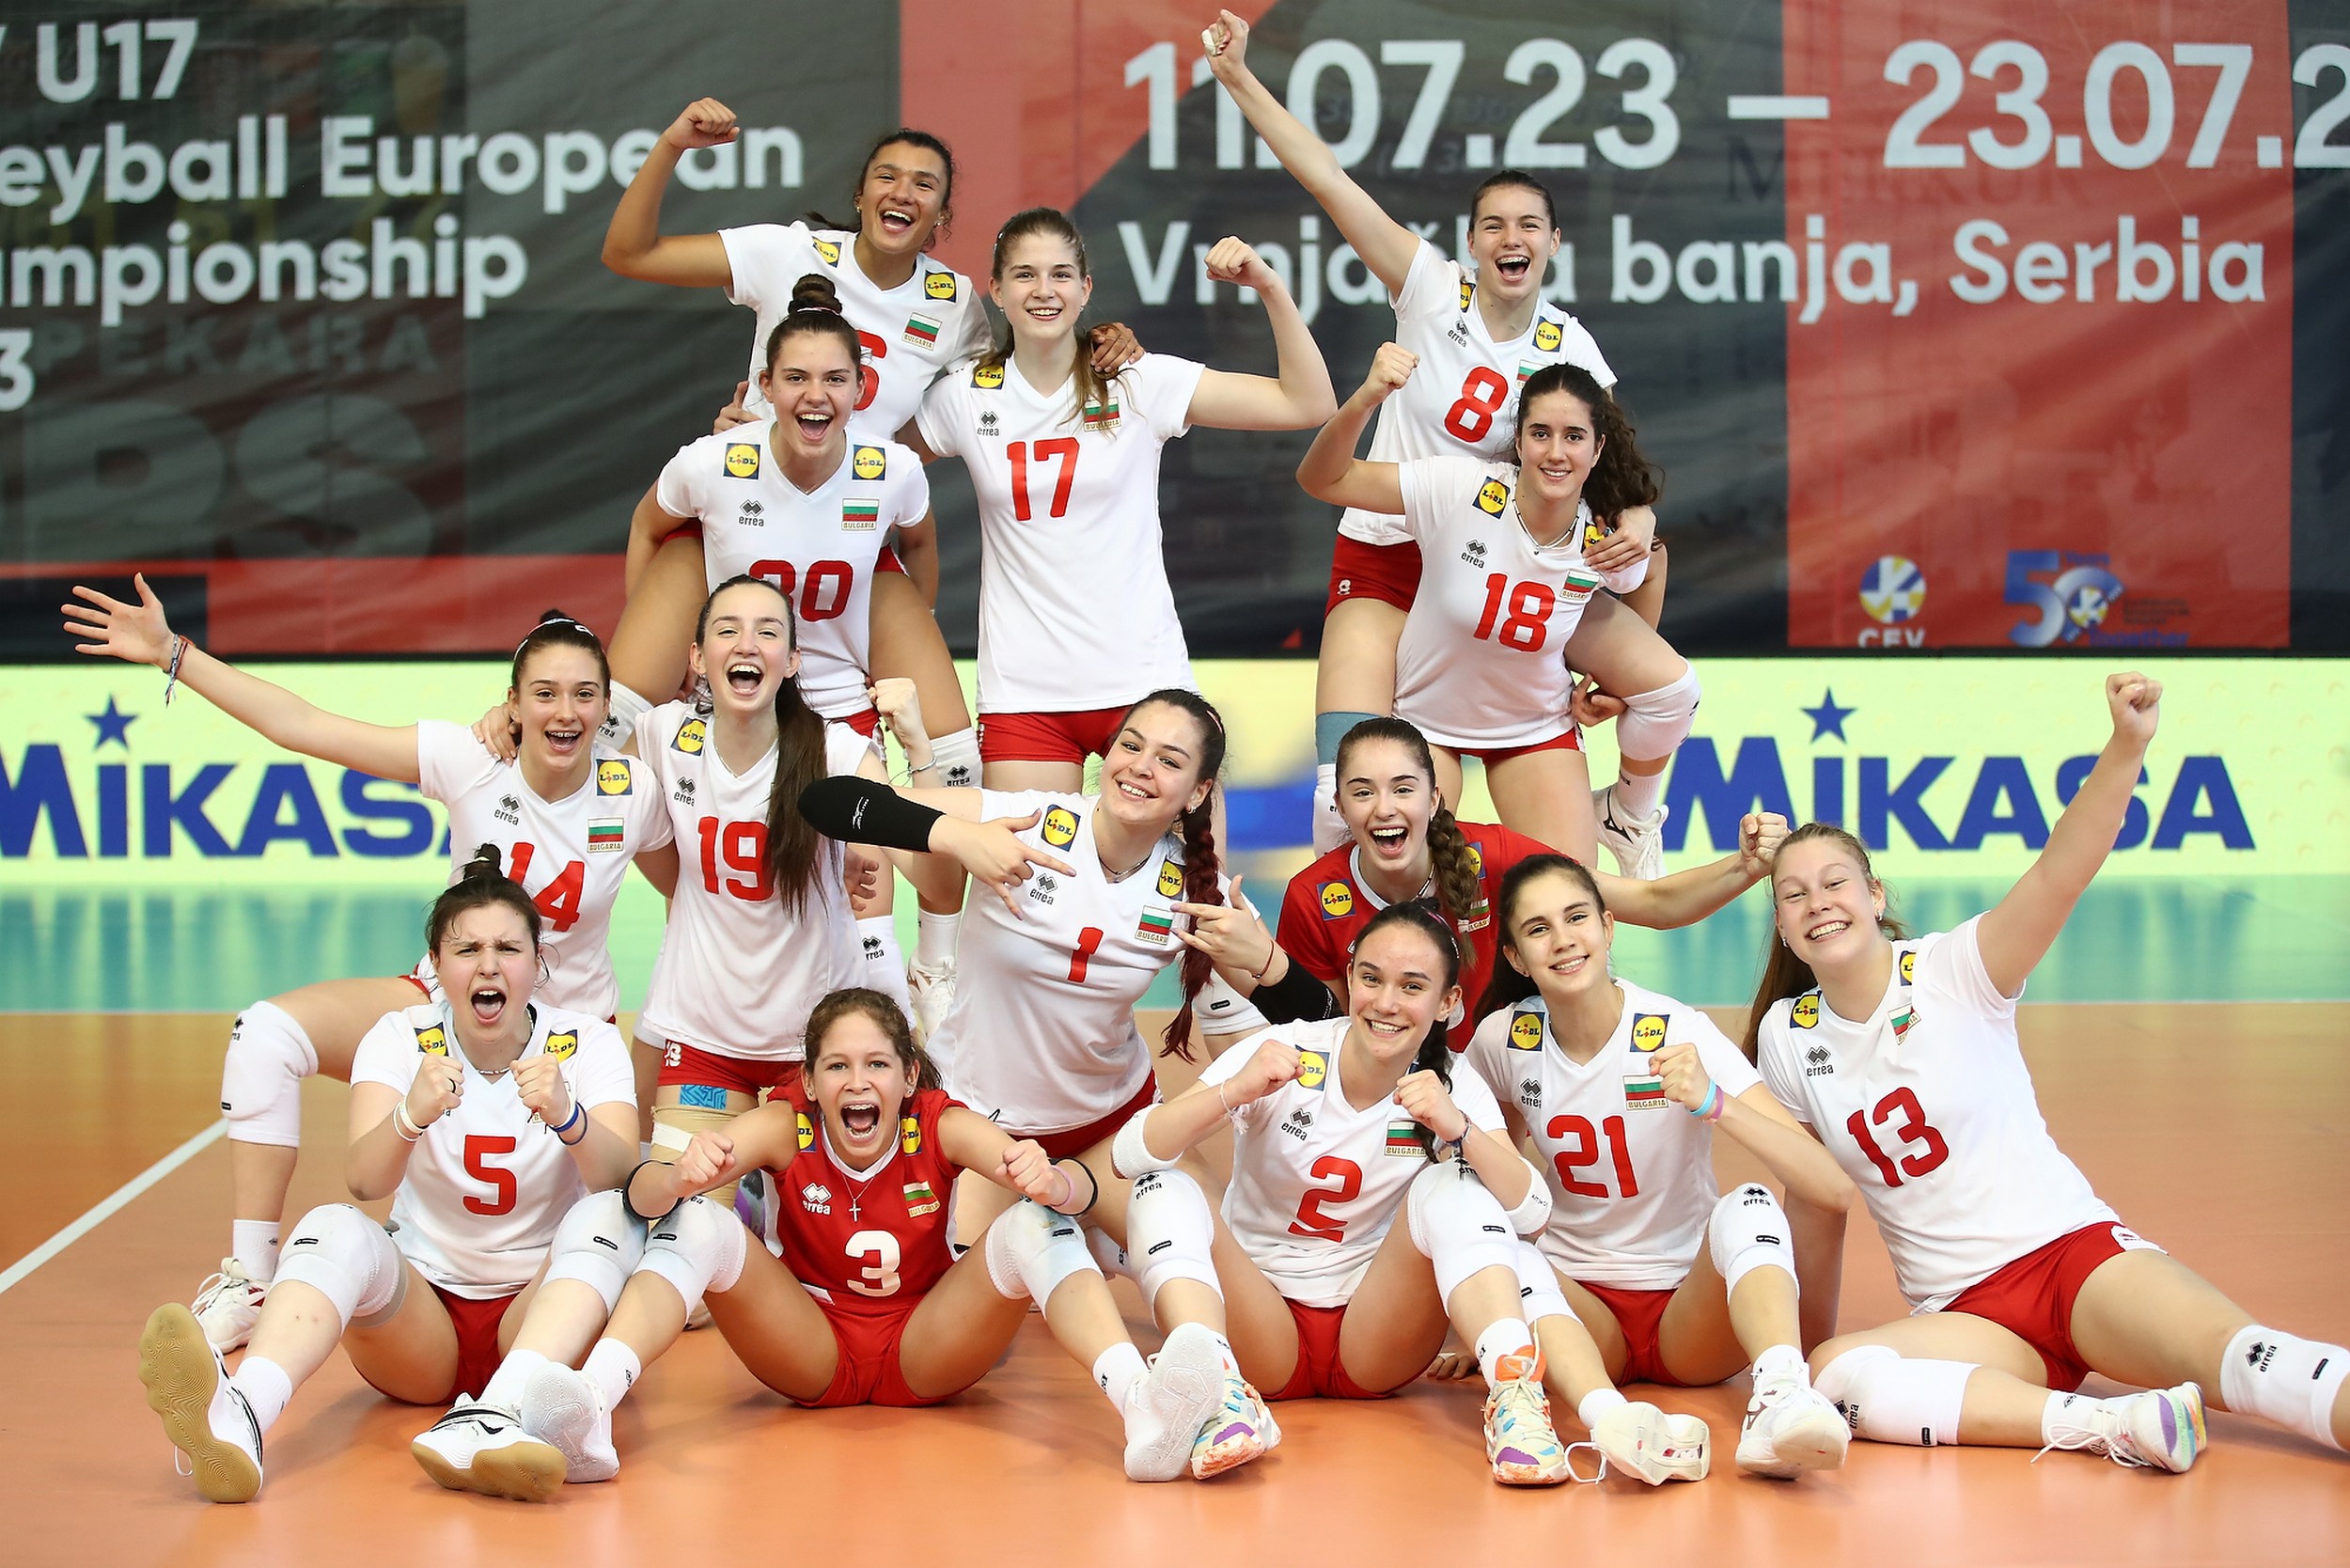 The U17 Women's European Championship gets Going in Serbia and Hungary ...